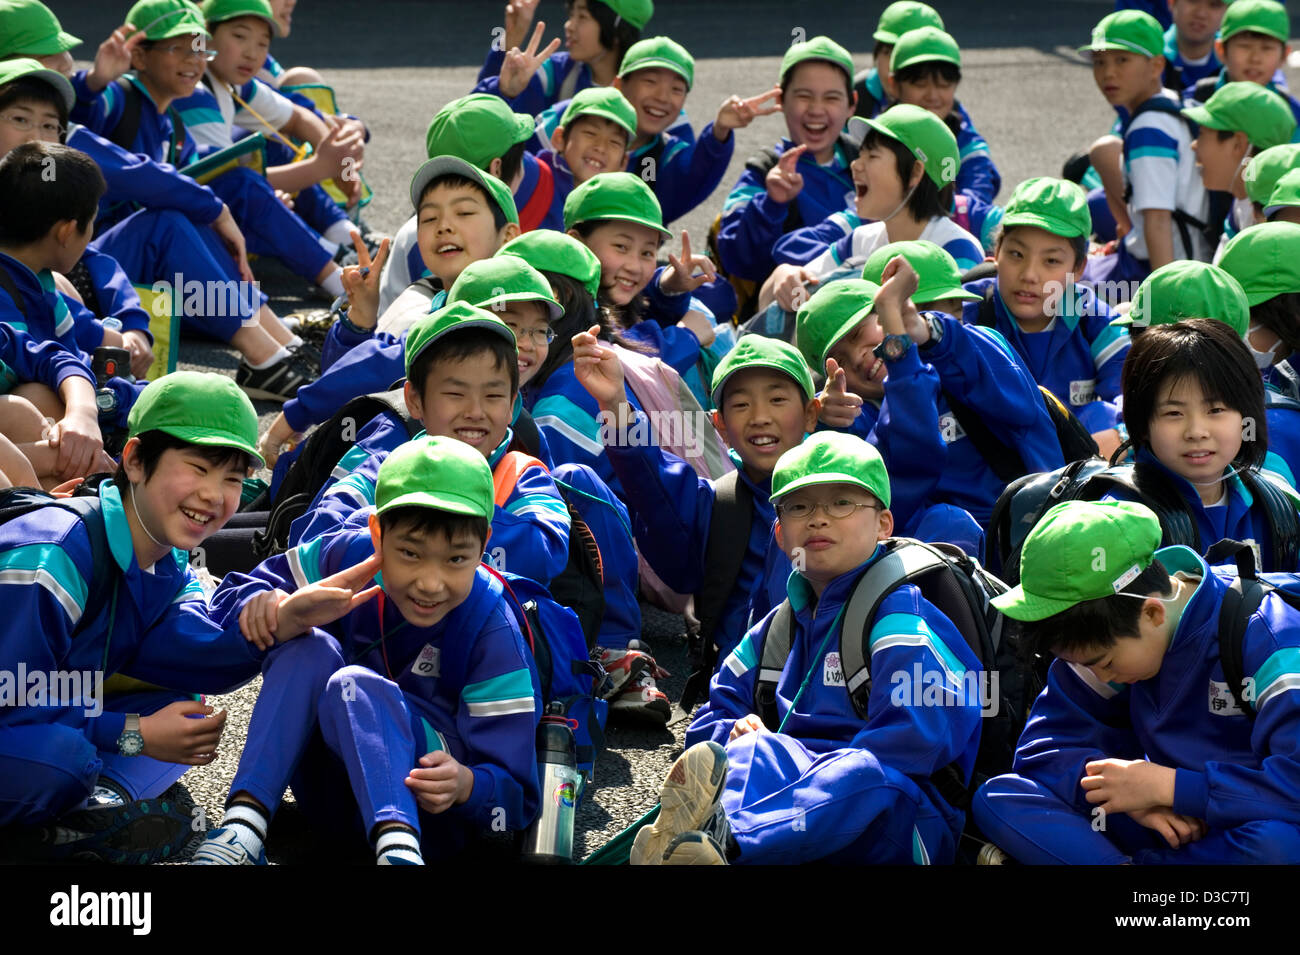 Smiling happy faces of Japanese elementary school boys and girls wearing colorful green caps and flashing the peace sign. Stock Photo